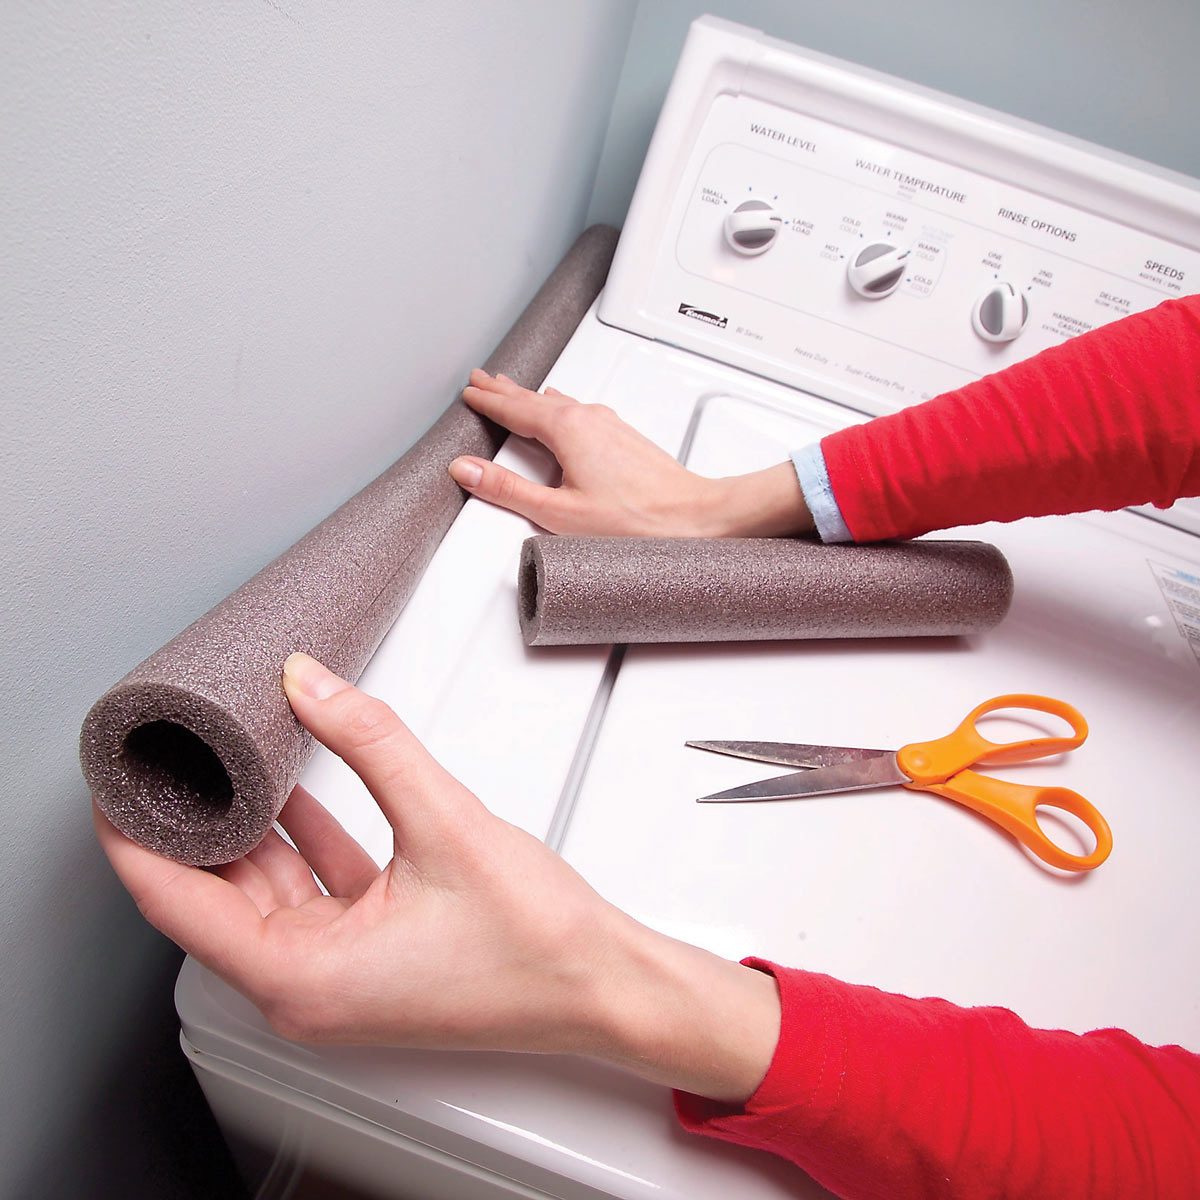 50 Easy DIY Home Hacks That Will Improve Your Life — Best Life